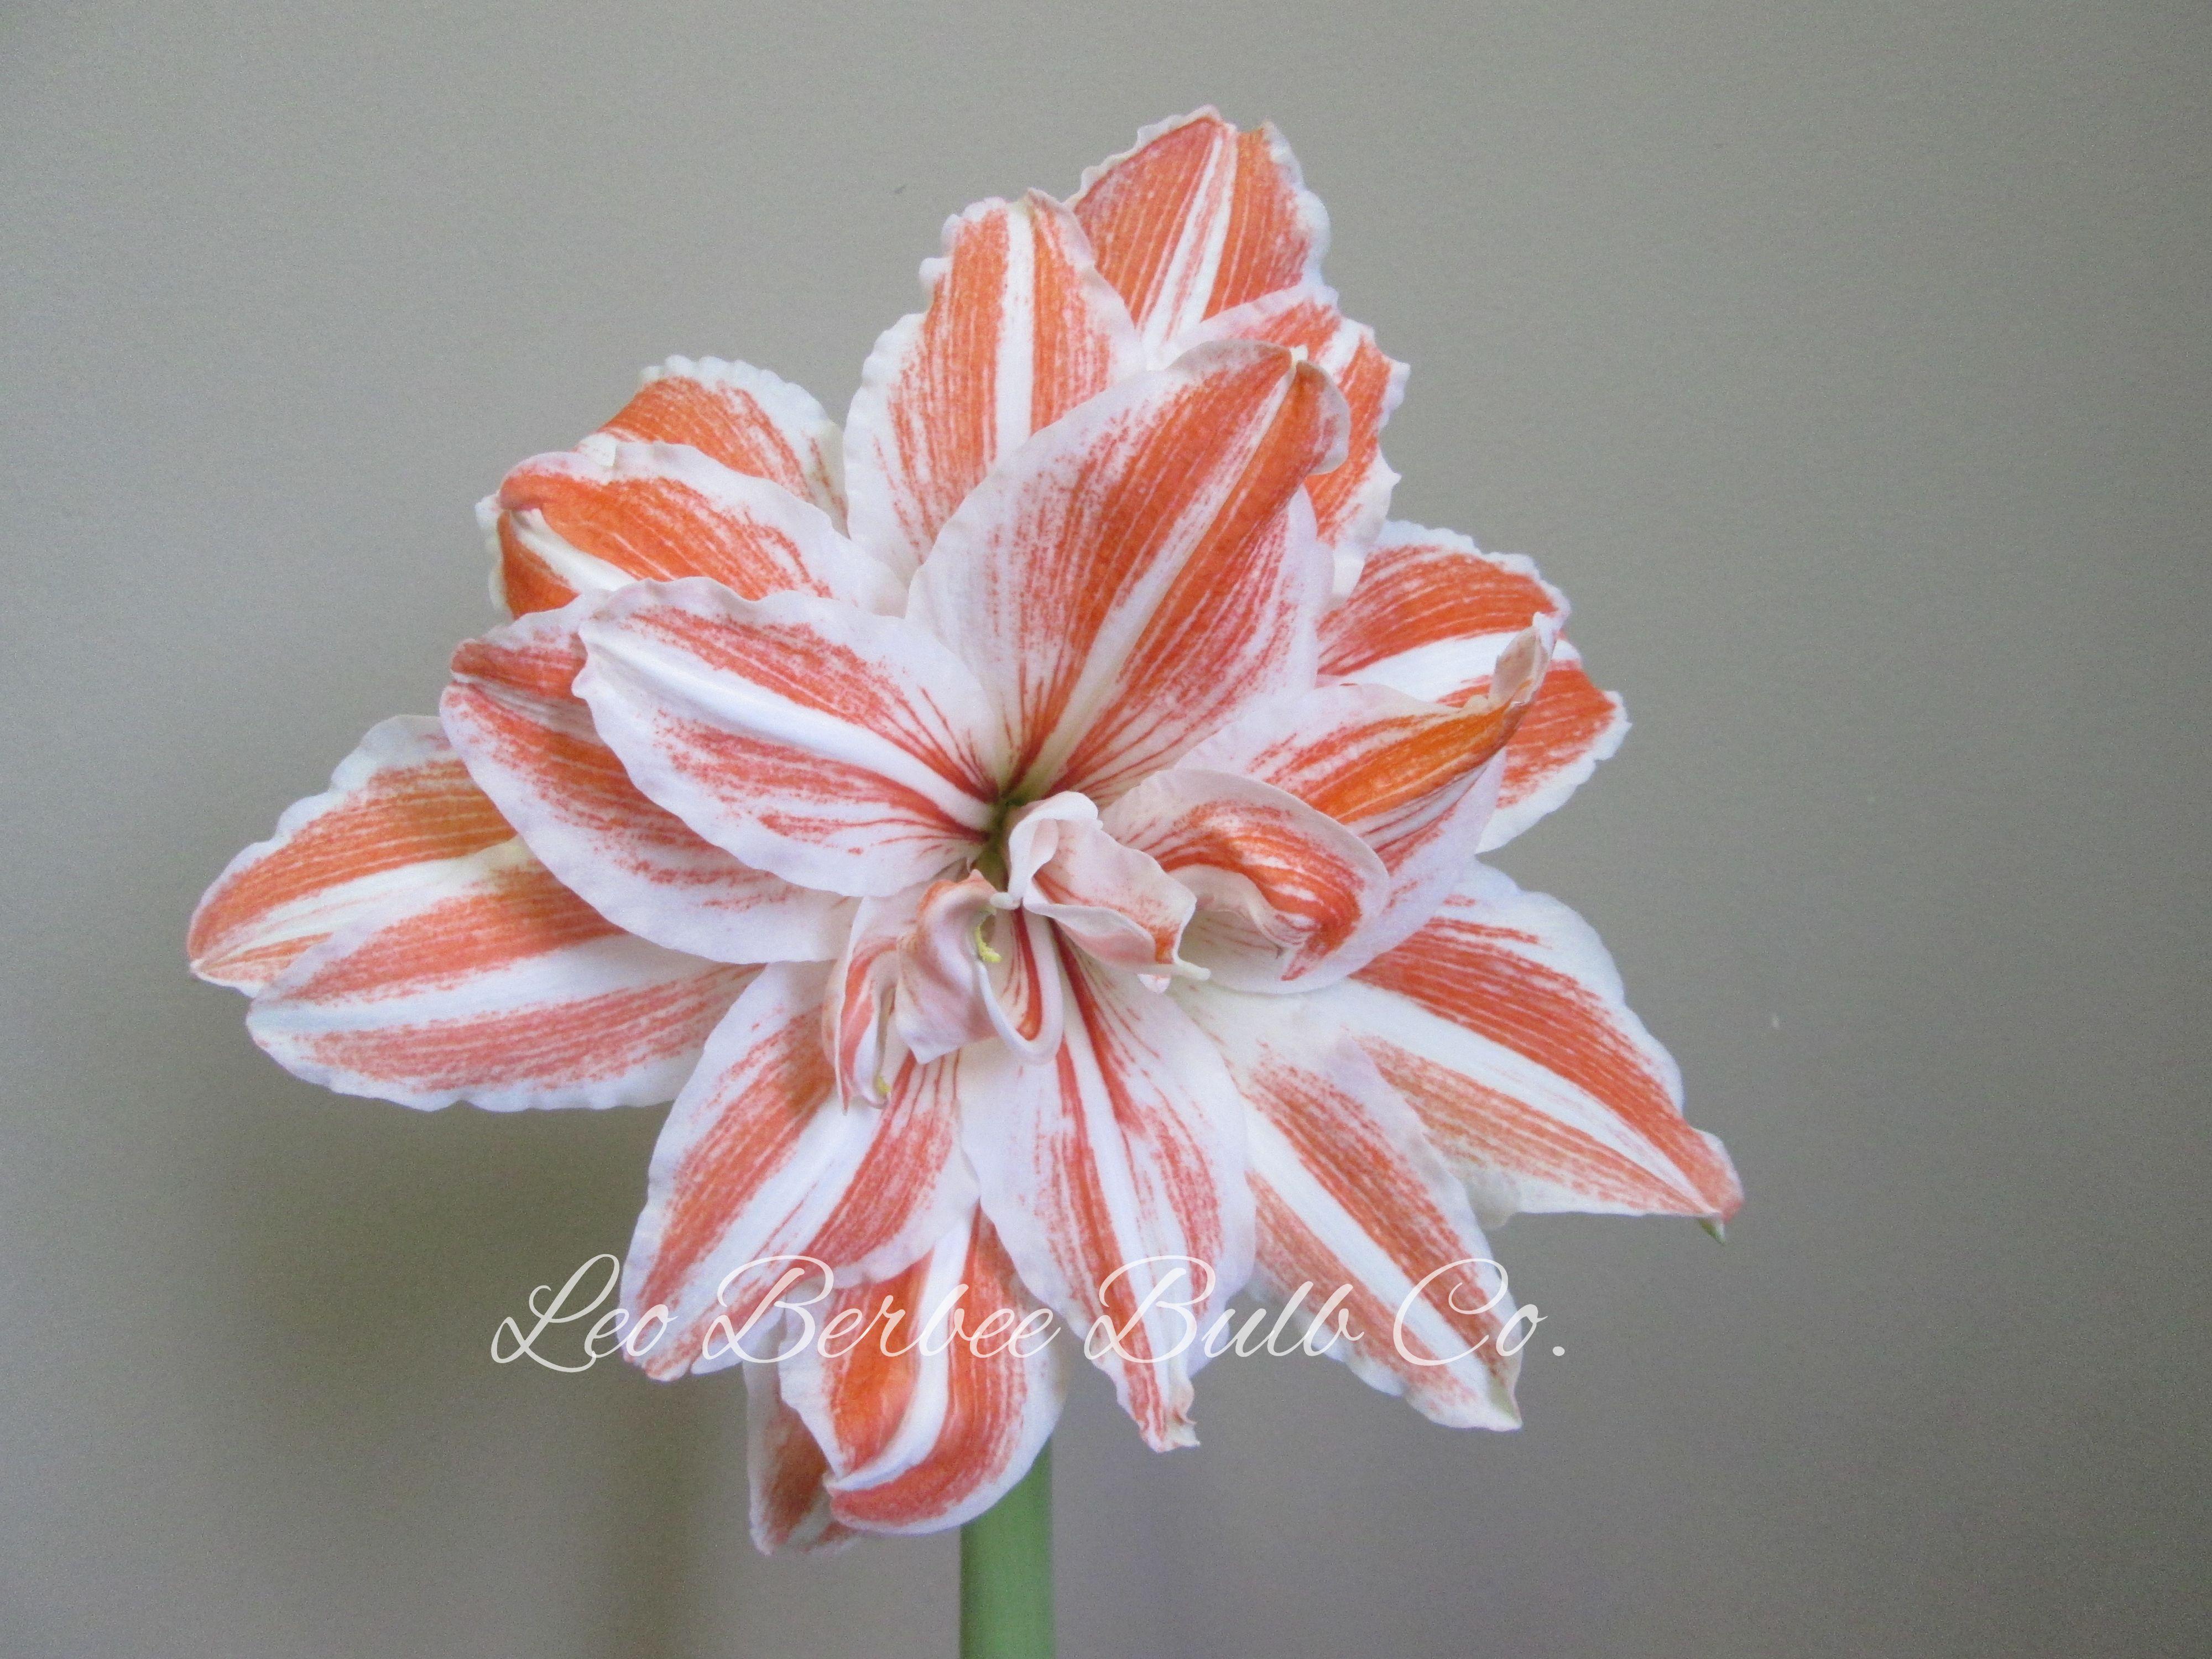 Hippeastrum Holland 'Dancing Queen' - Amaryllis (Shipping begins Oct. 2021) from Leo Berbee Bulb Company